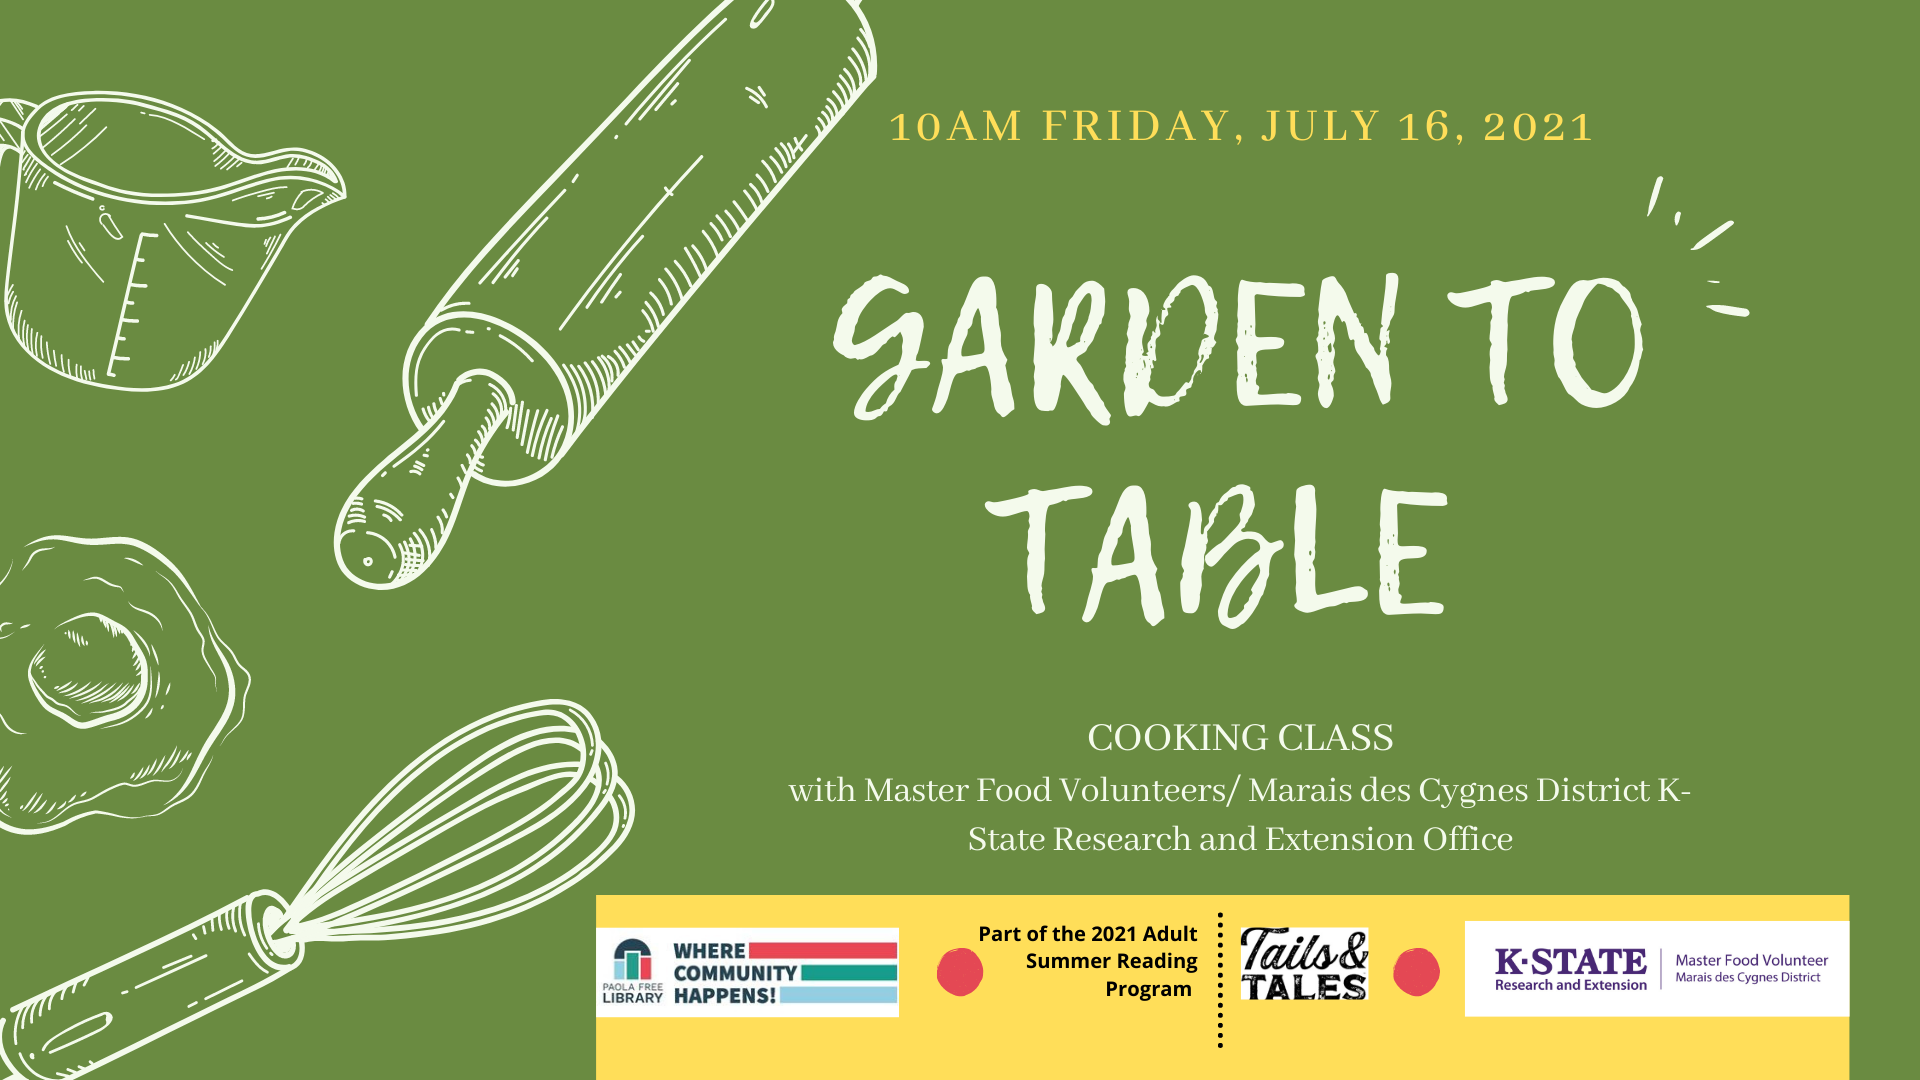 Garden to Table Cooking Class event picture 7-16-2021